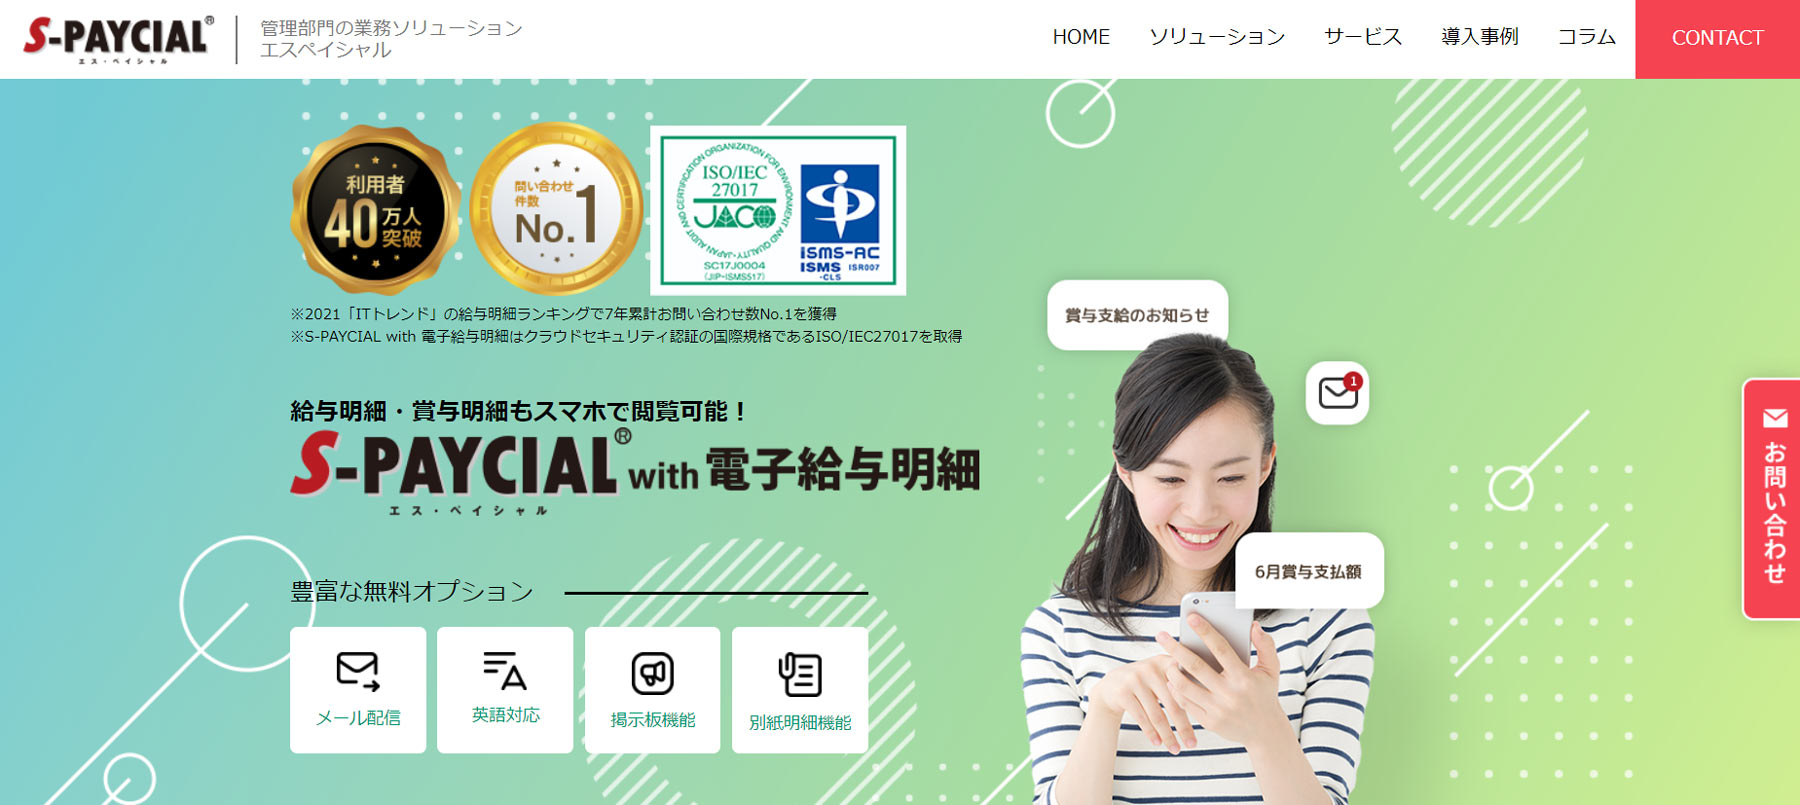 S-PAYCIAL with 電子給与明細公式Webサイト